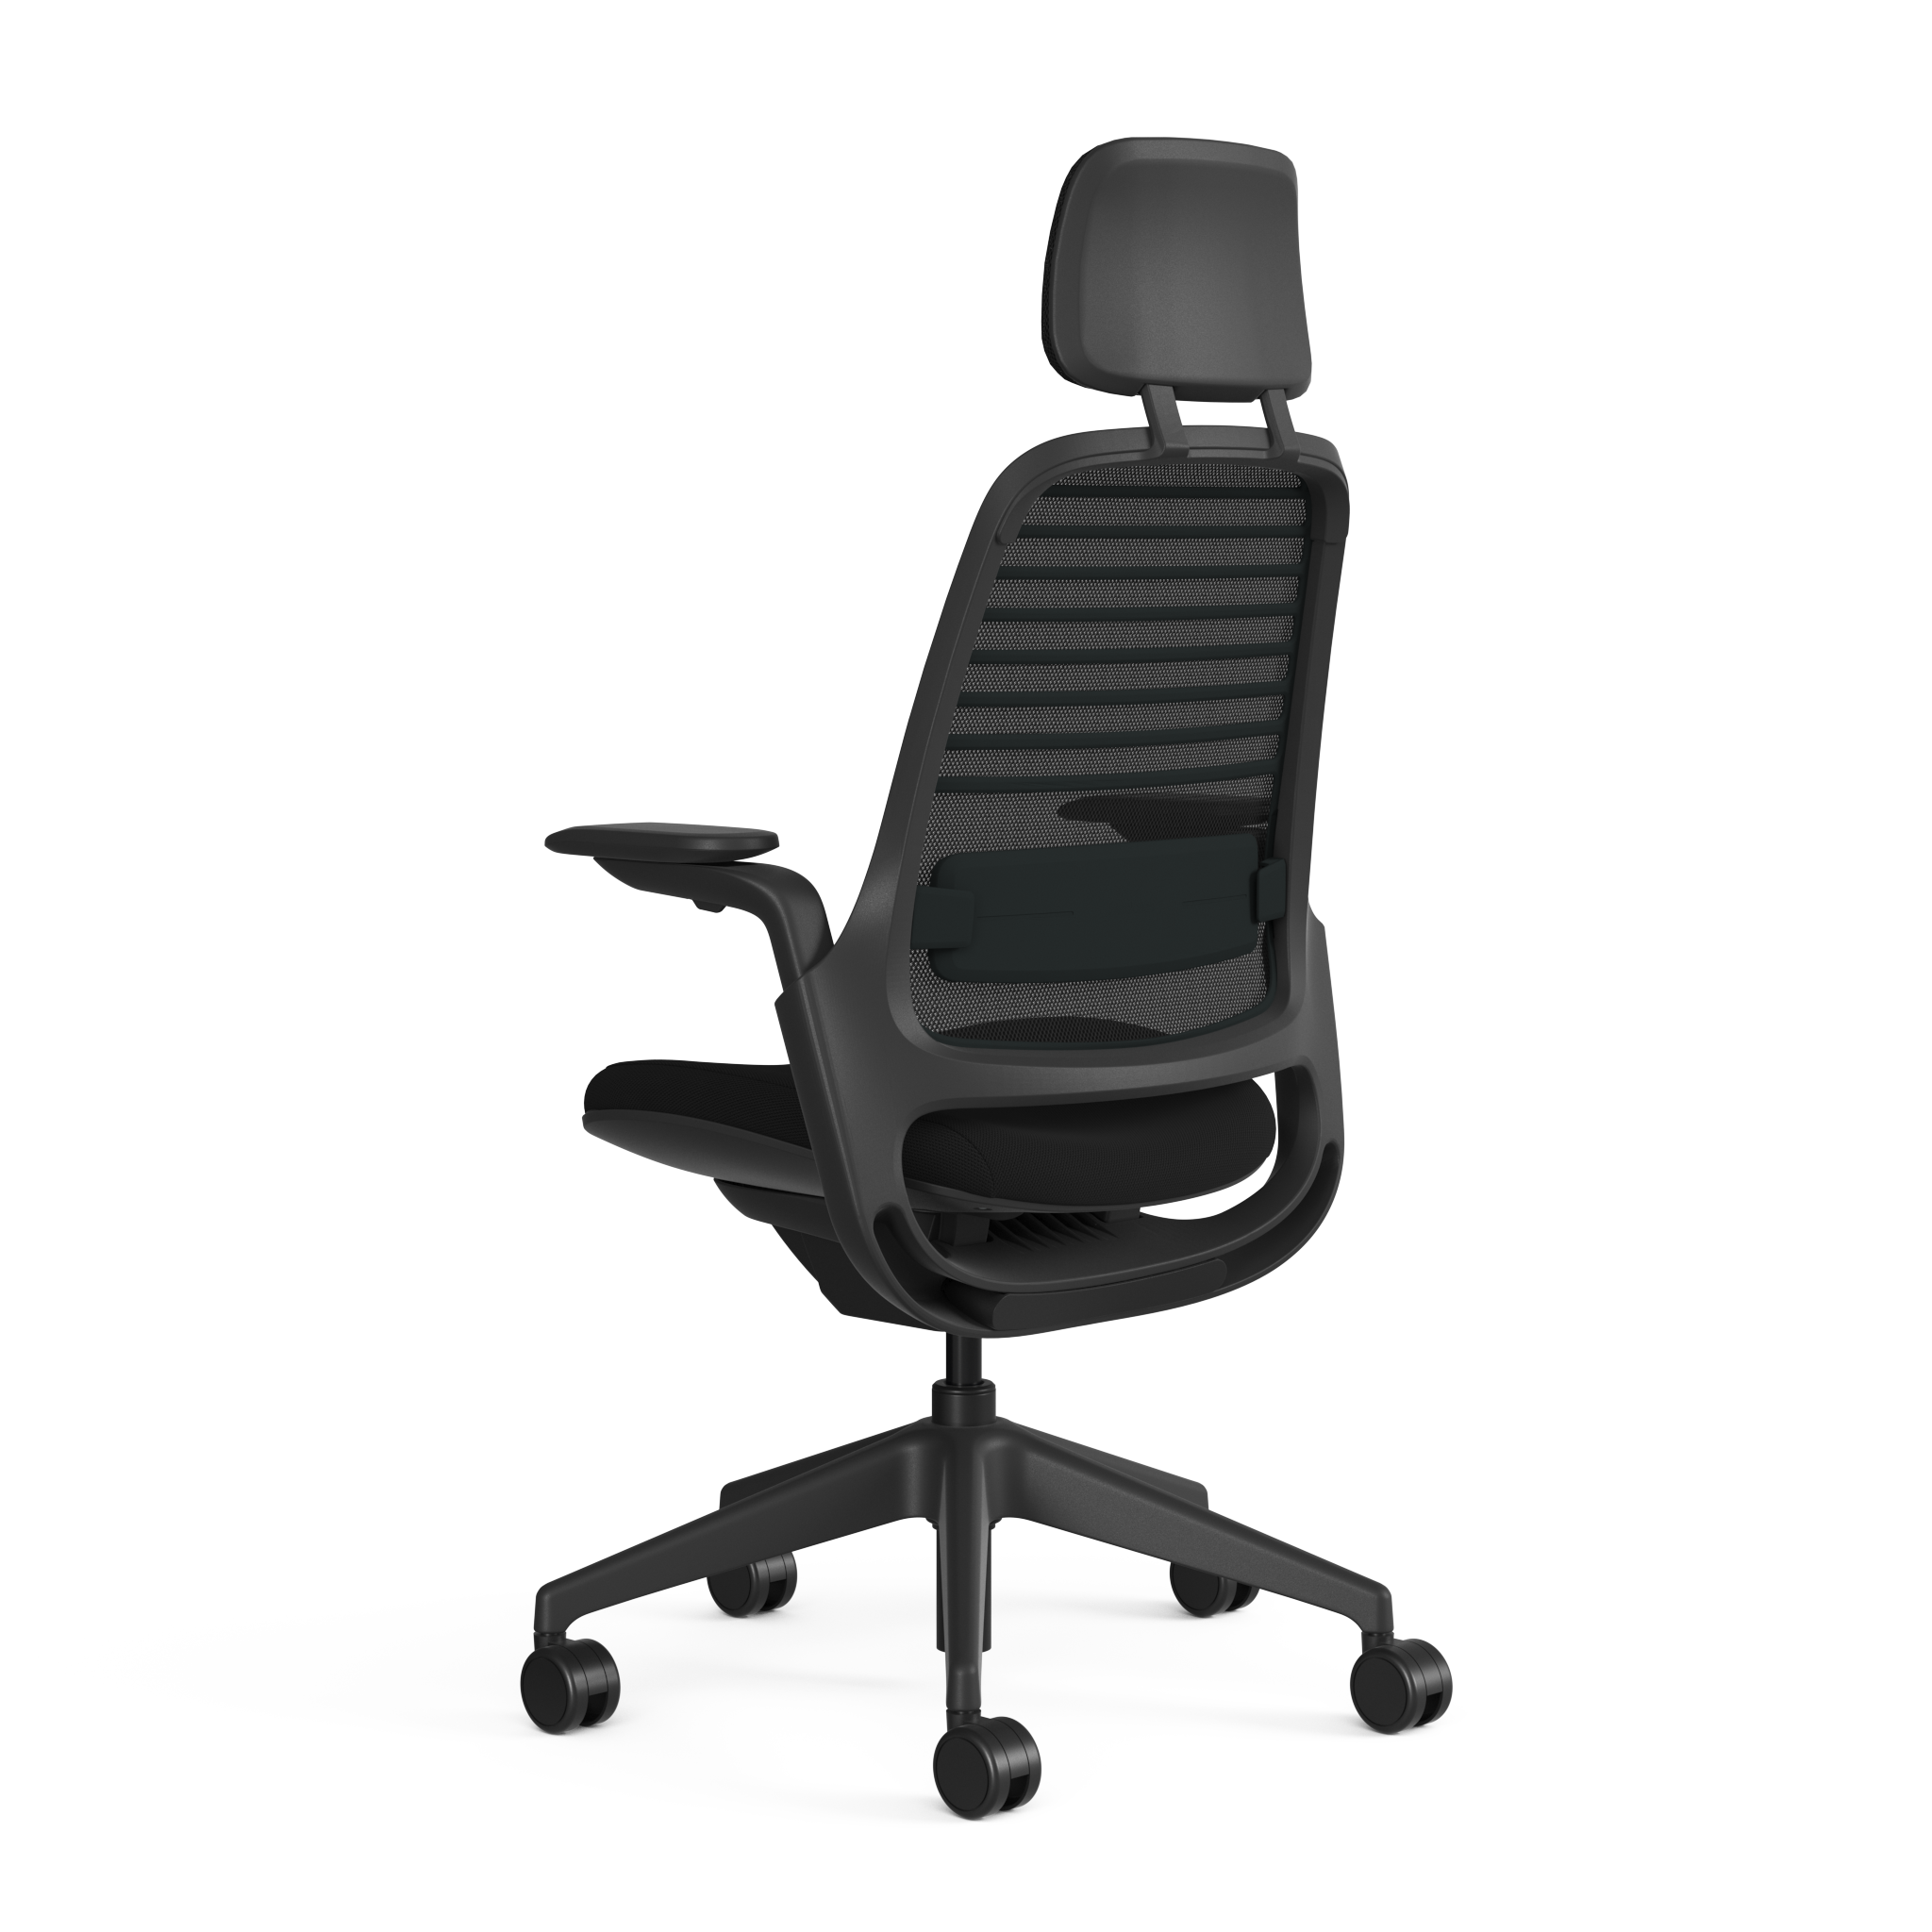 Meshback 3D Microknit Licorice; Seat Cogent Connect Licorice; Frame Black